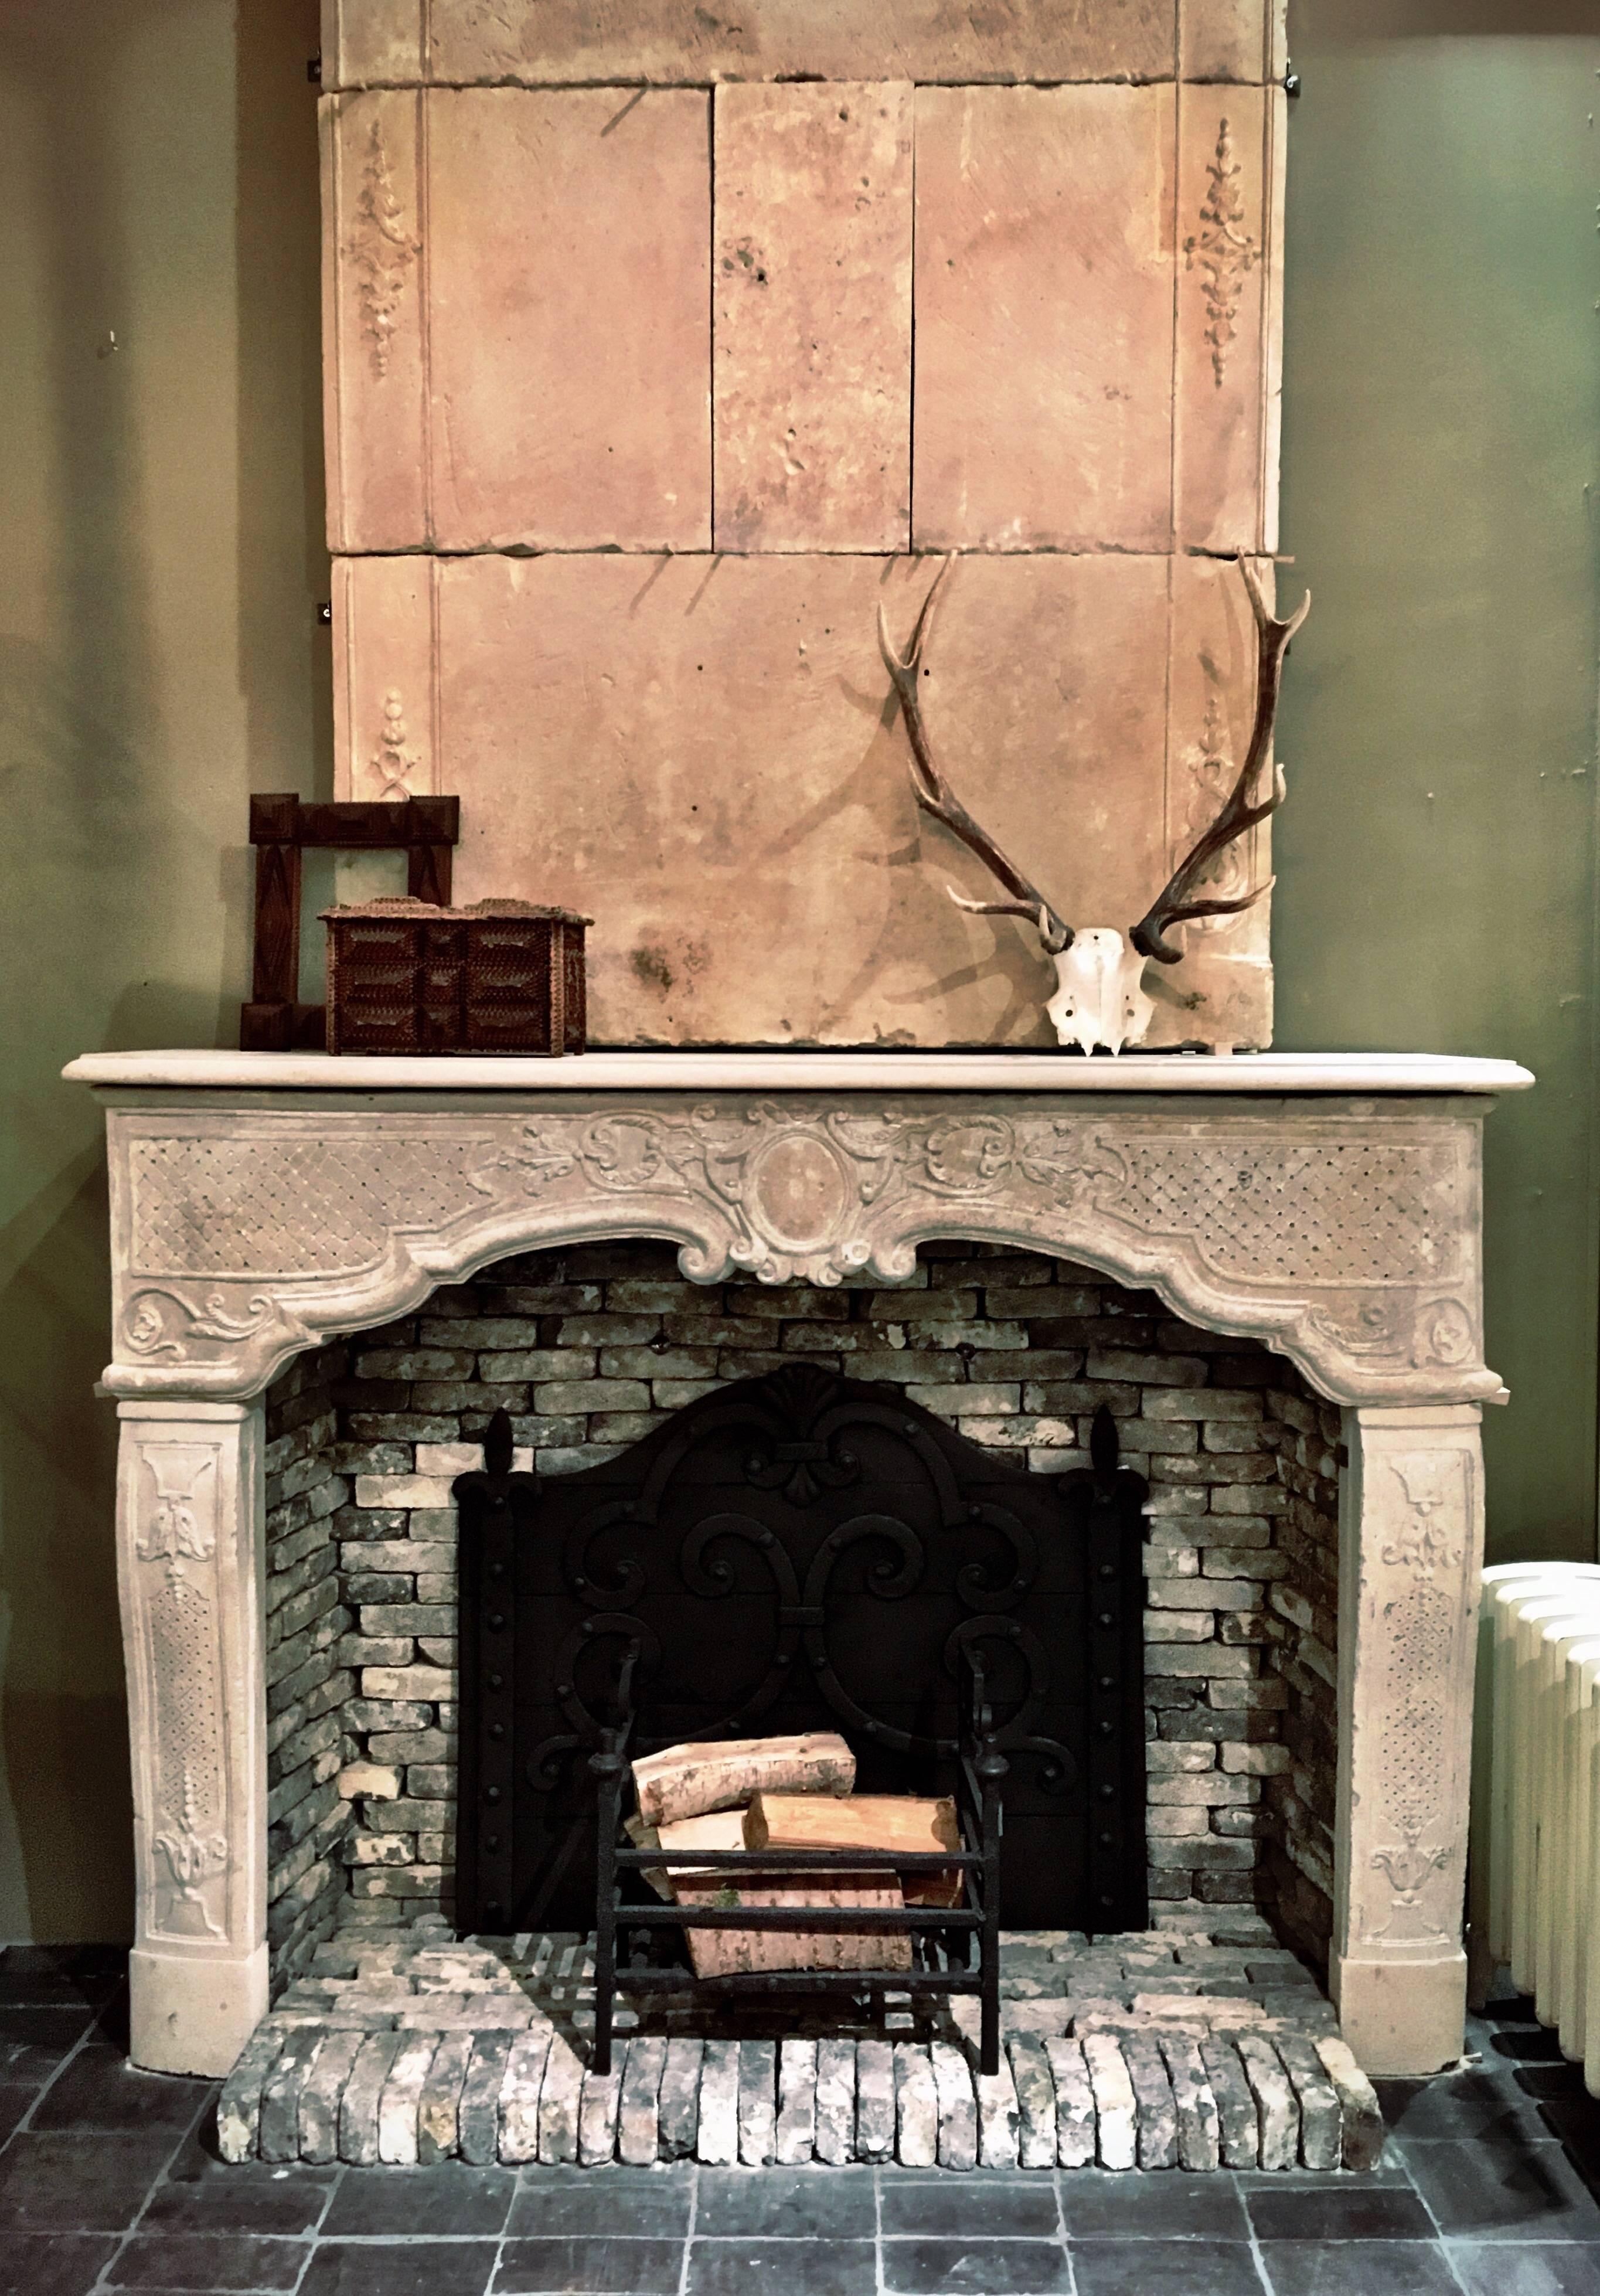 Beautiful mantelpiece made from French limestone decorated with carvings in Rococo and Baroque style. This fireplace comes with a trumeau (chimney cover), which is very rare. 

The dimensions of the fireplace are width 188 cm x height 135 cm x